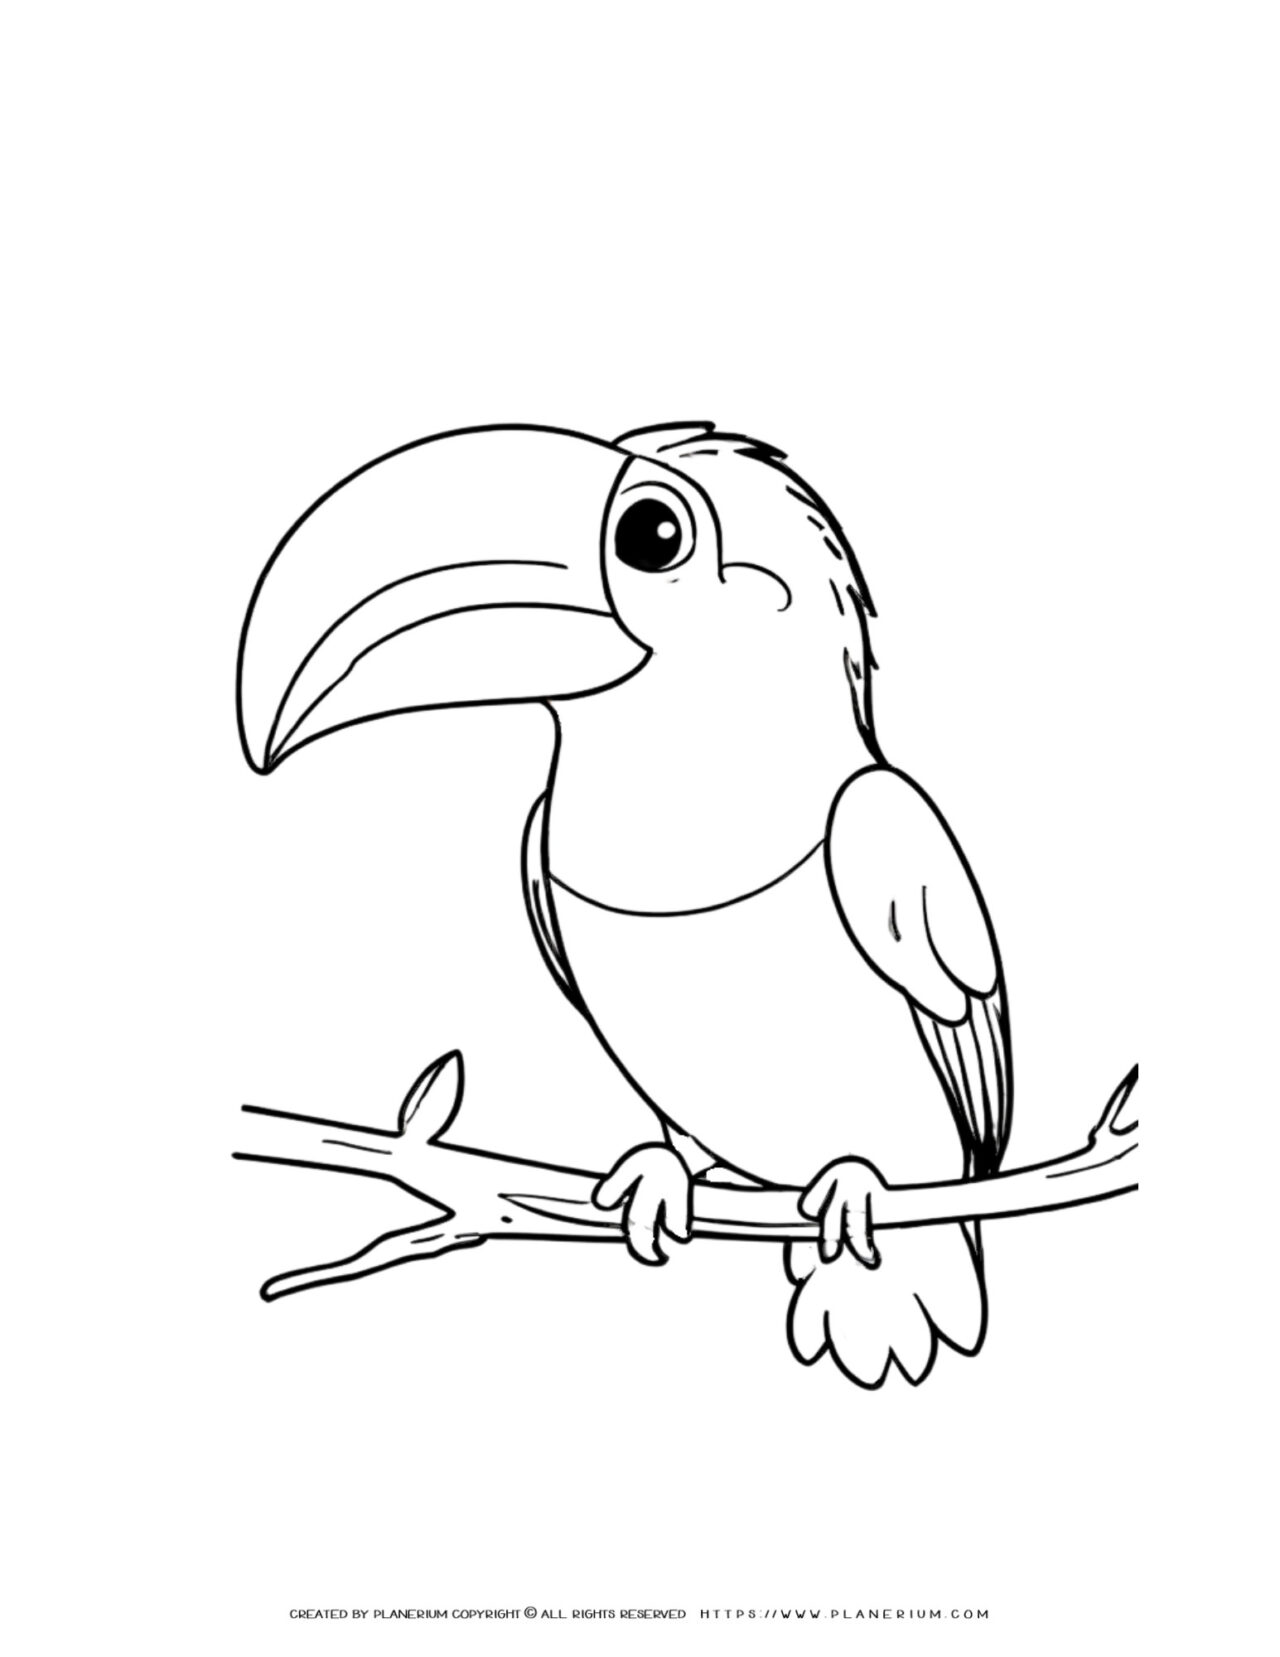 Friendly-Toucan-Perched-Simple-Bird-Coloring-Page